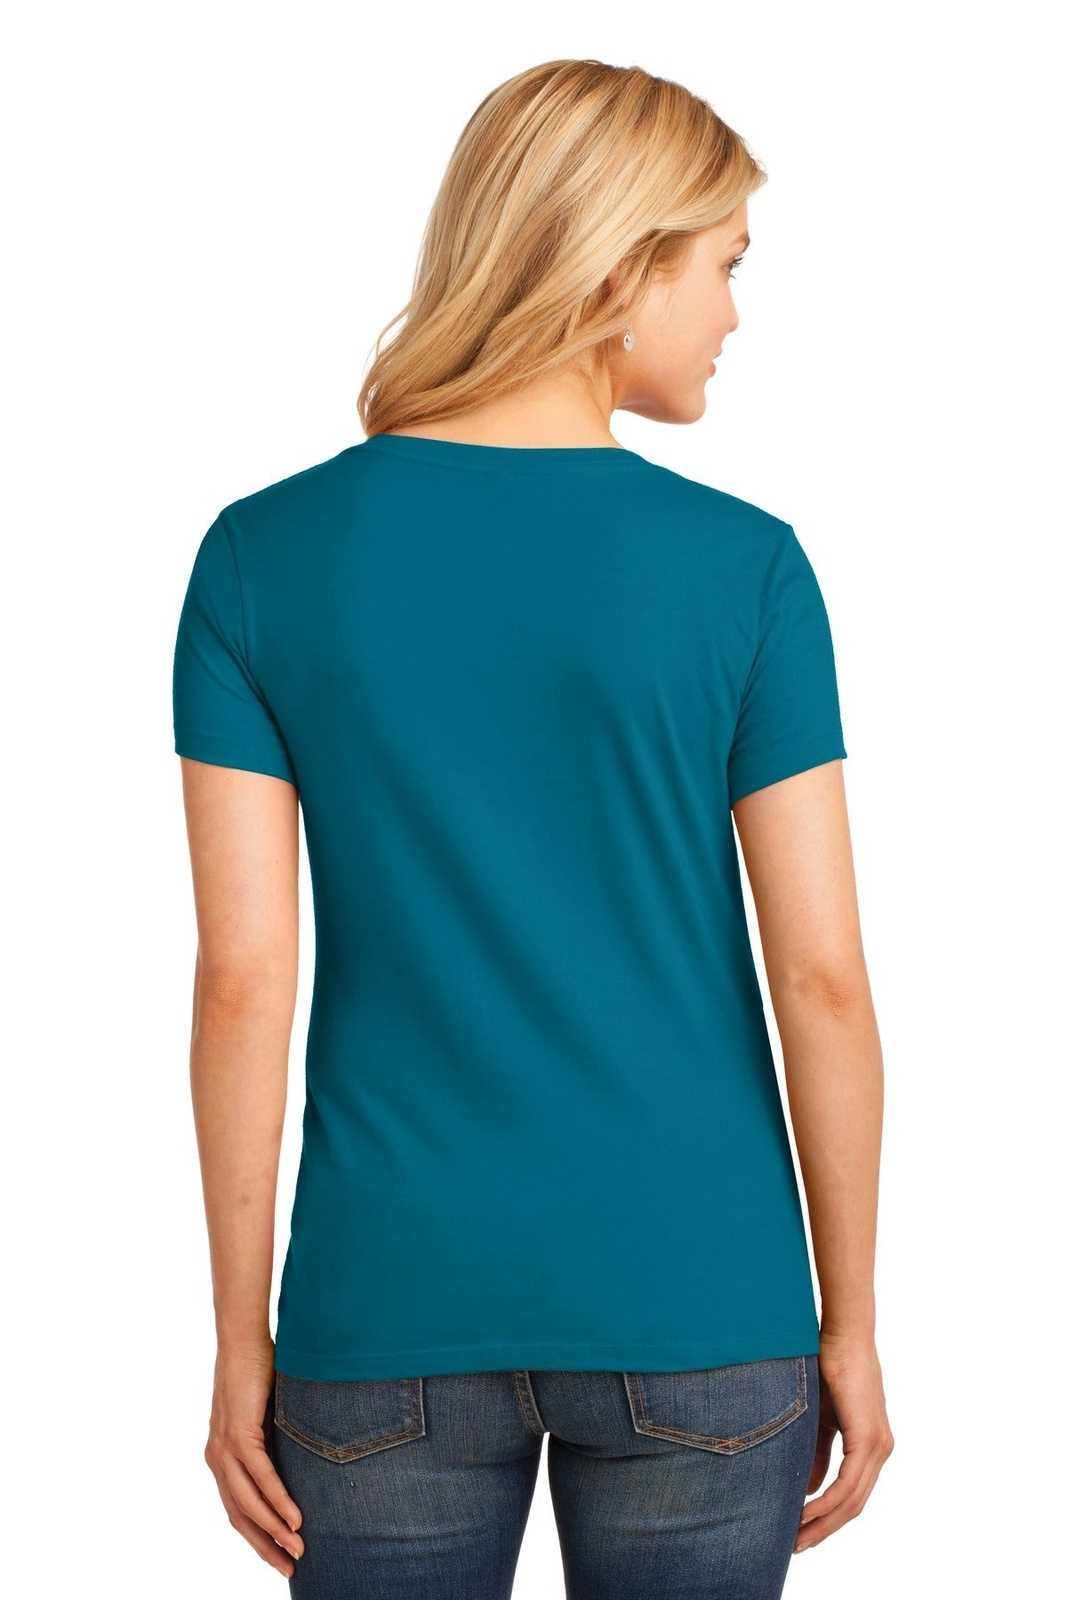 Port &amp; Company LPC54V Ladies Core Cotton V-Neck Tee - Teal - HIT a Double - 2